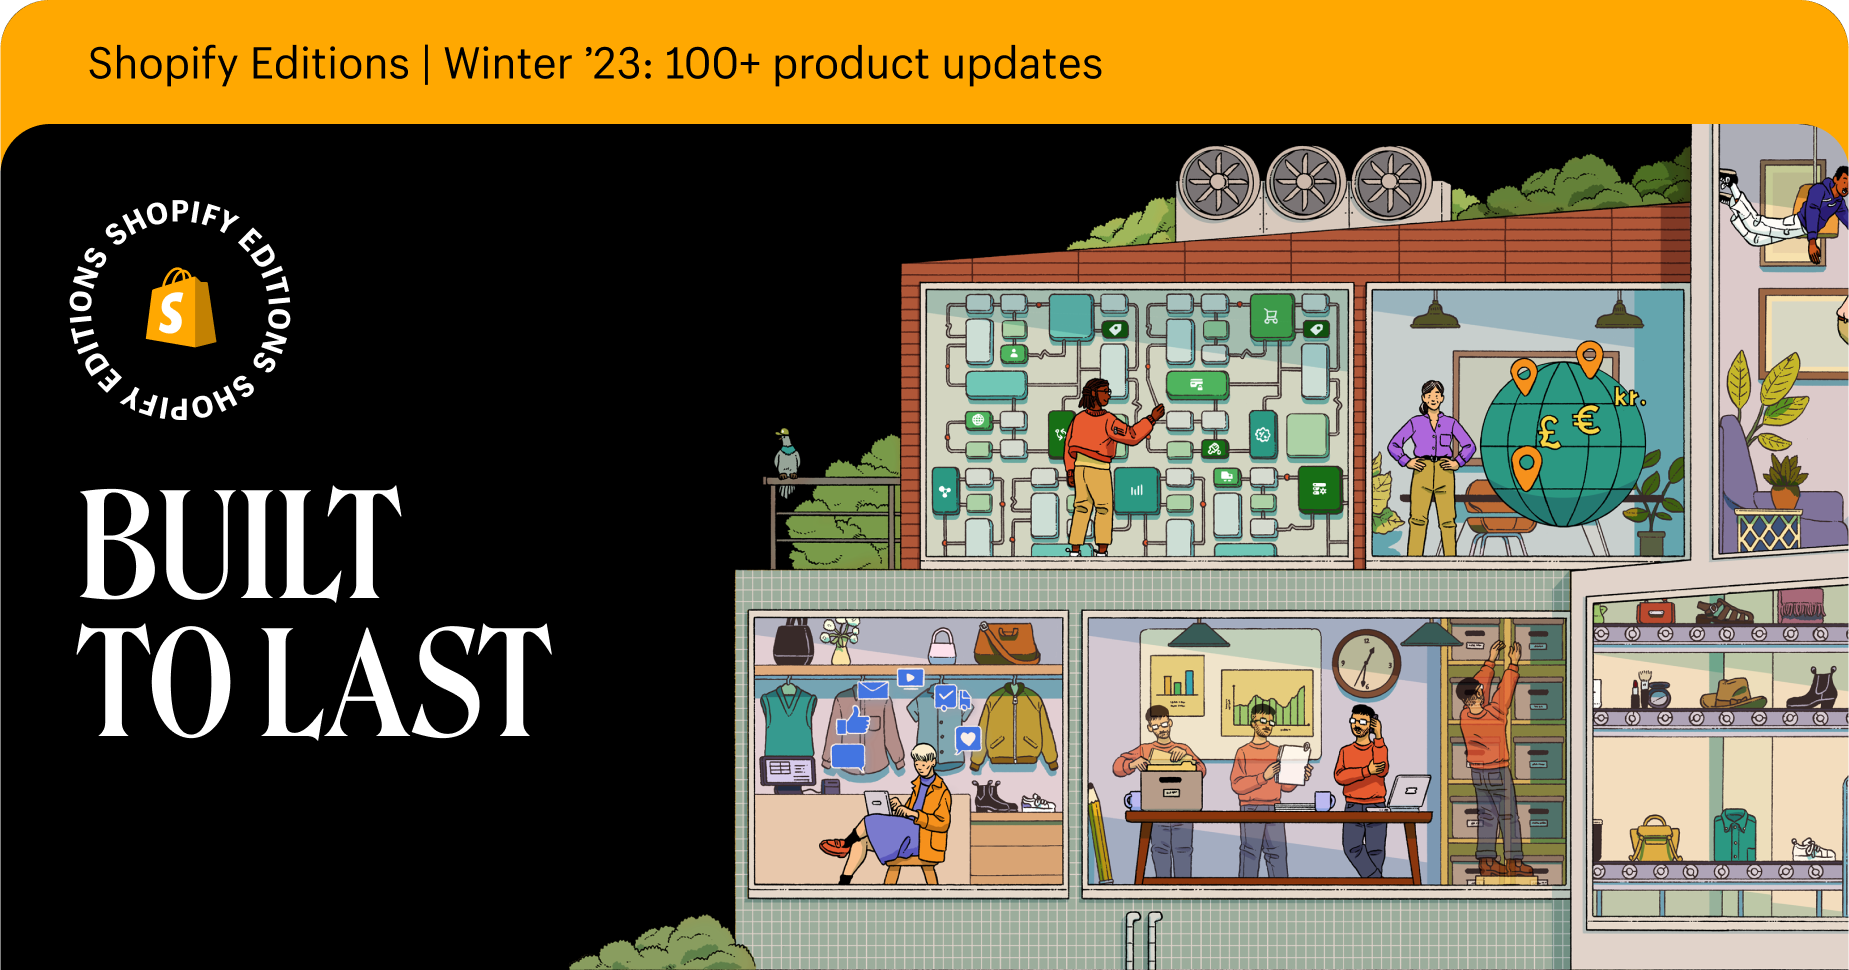 Shopify Editions Winter 23 roundup